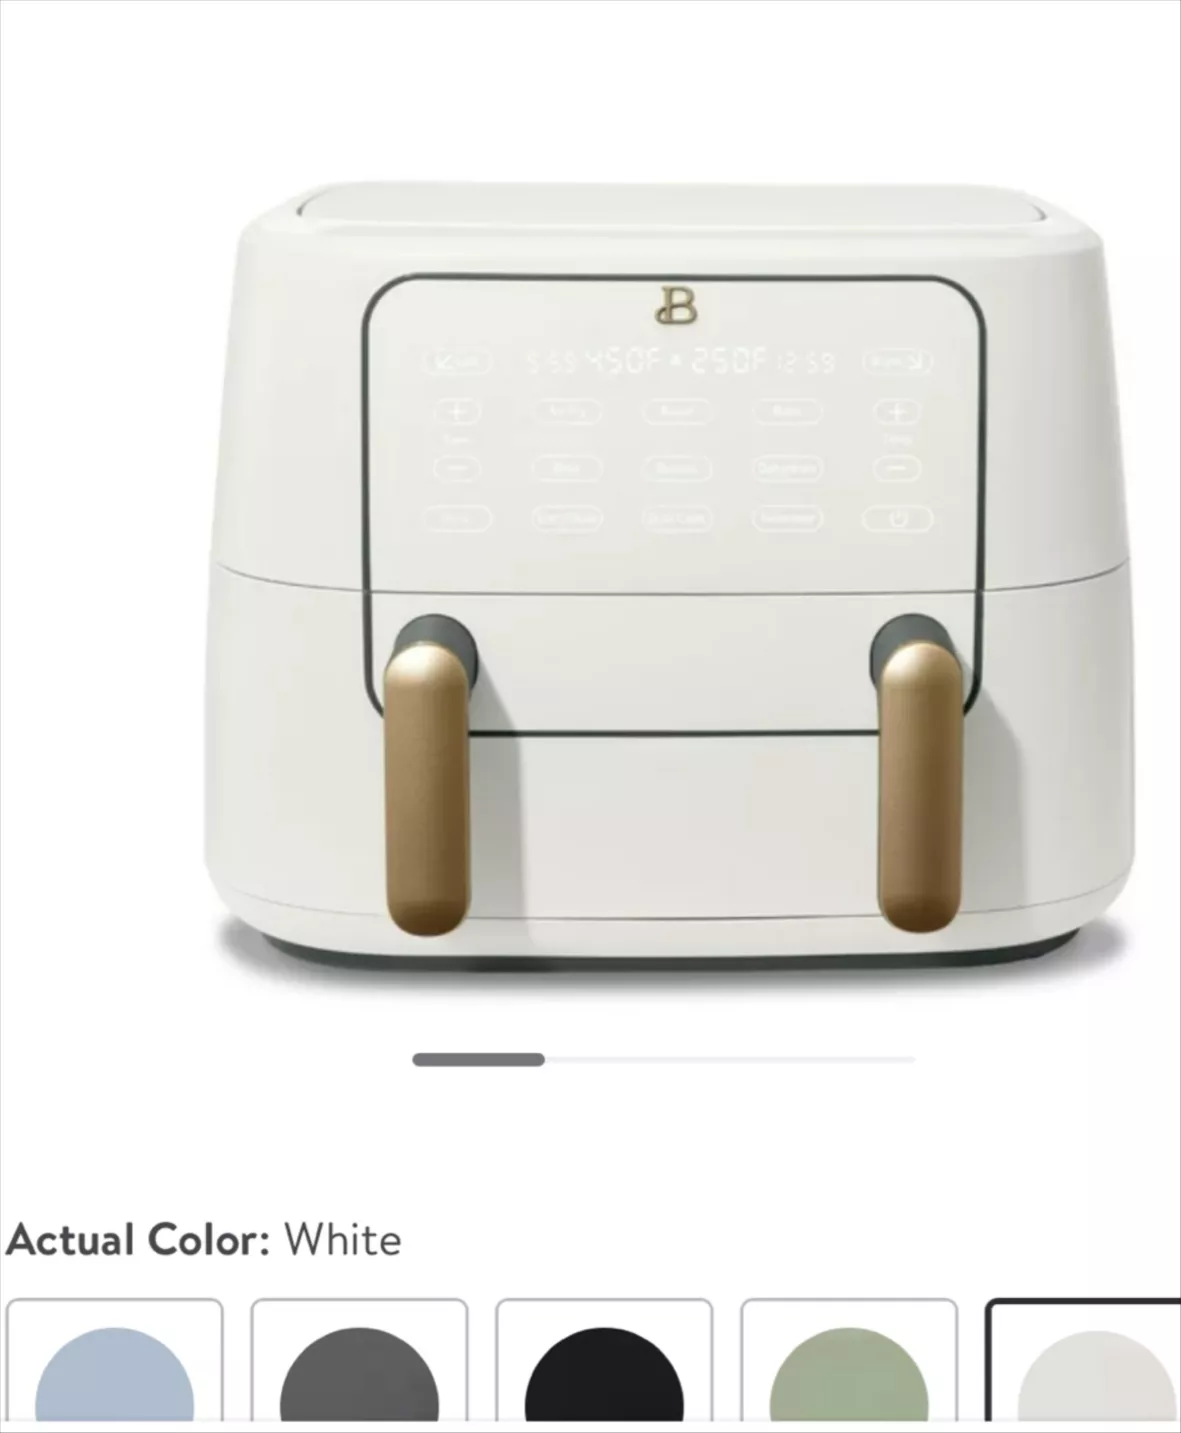 Beautiful 2 Slice Touchscreen Toaster, White Icing by Drew Barrymore